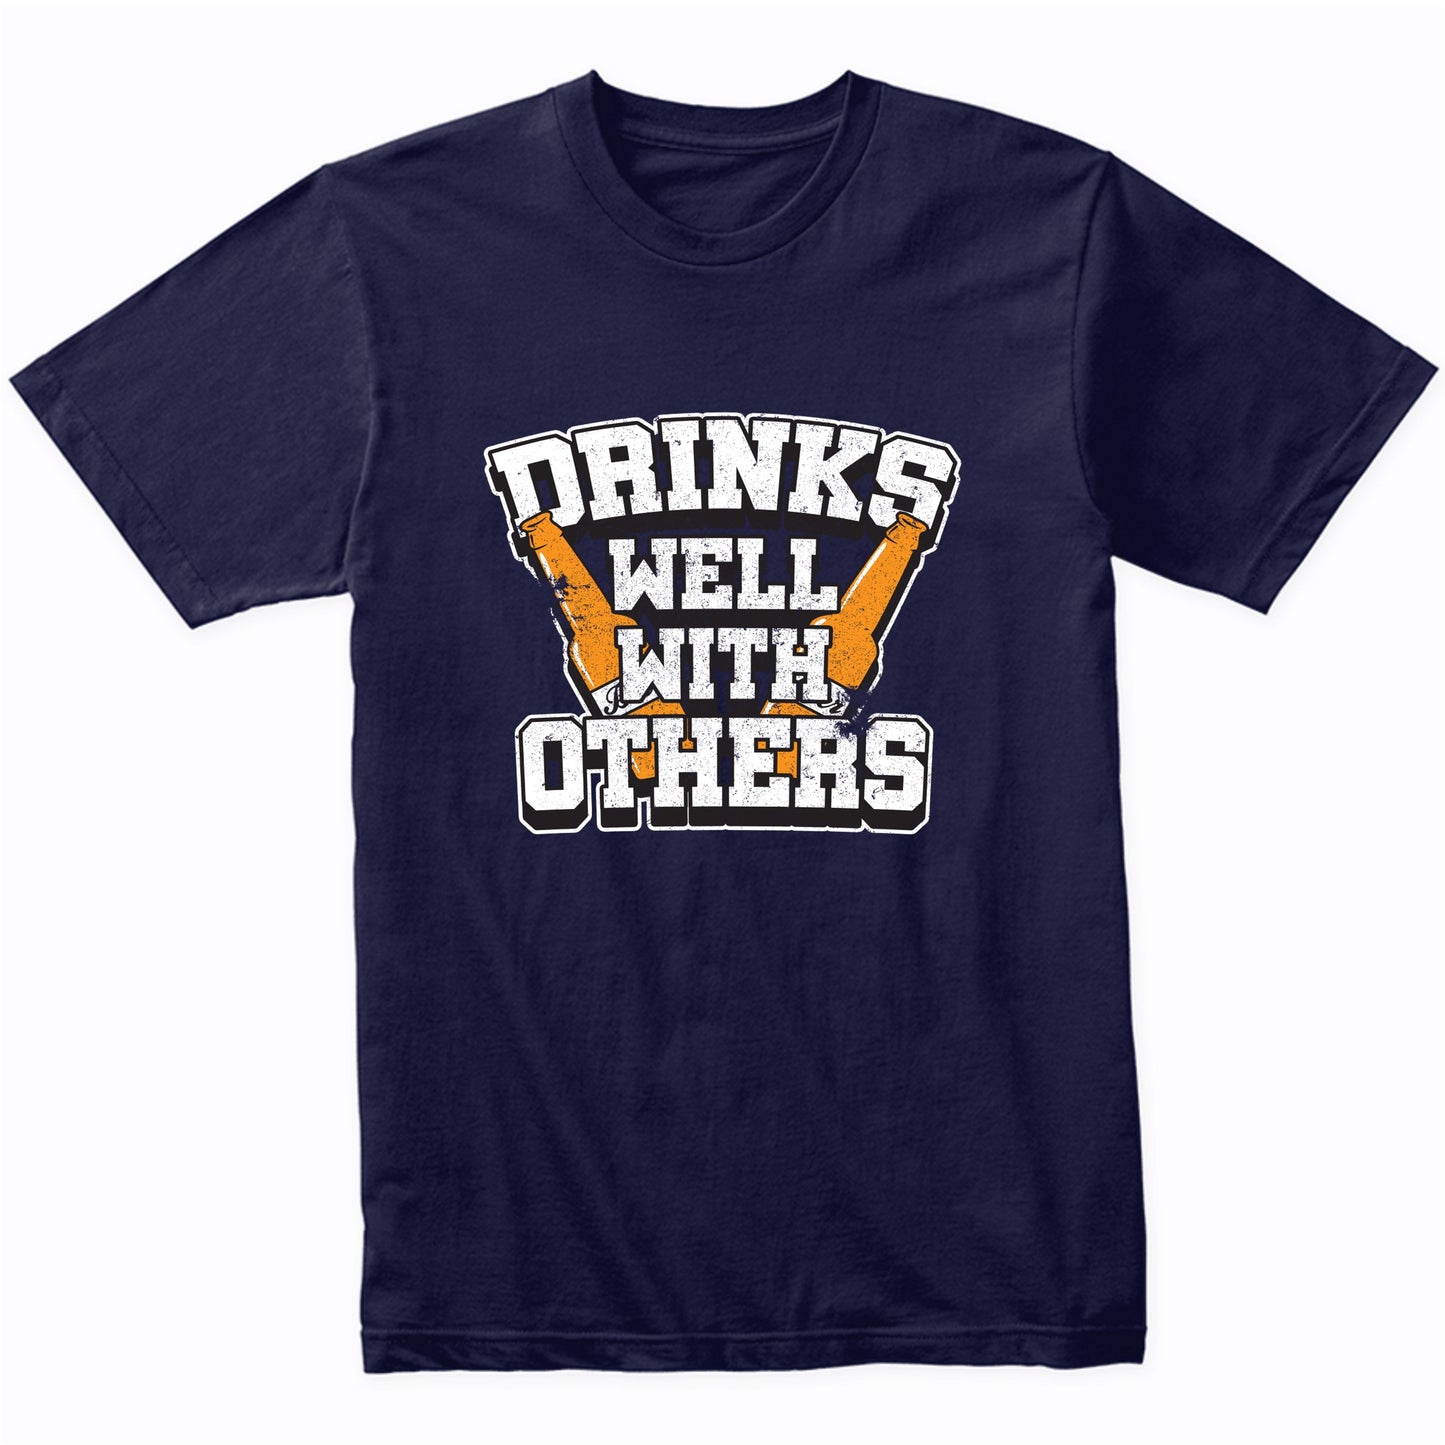 Drinks Well With Others Funny Beer Shirt